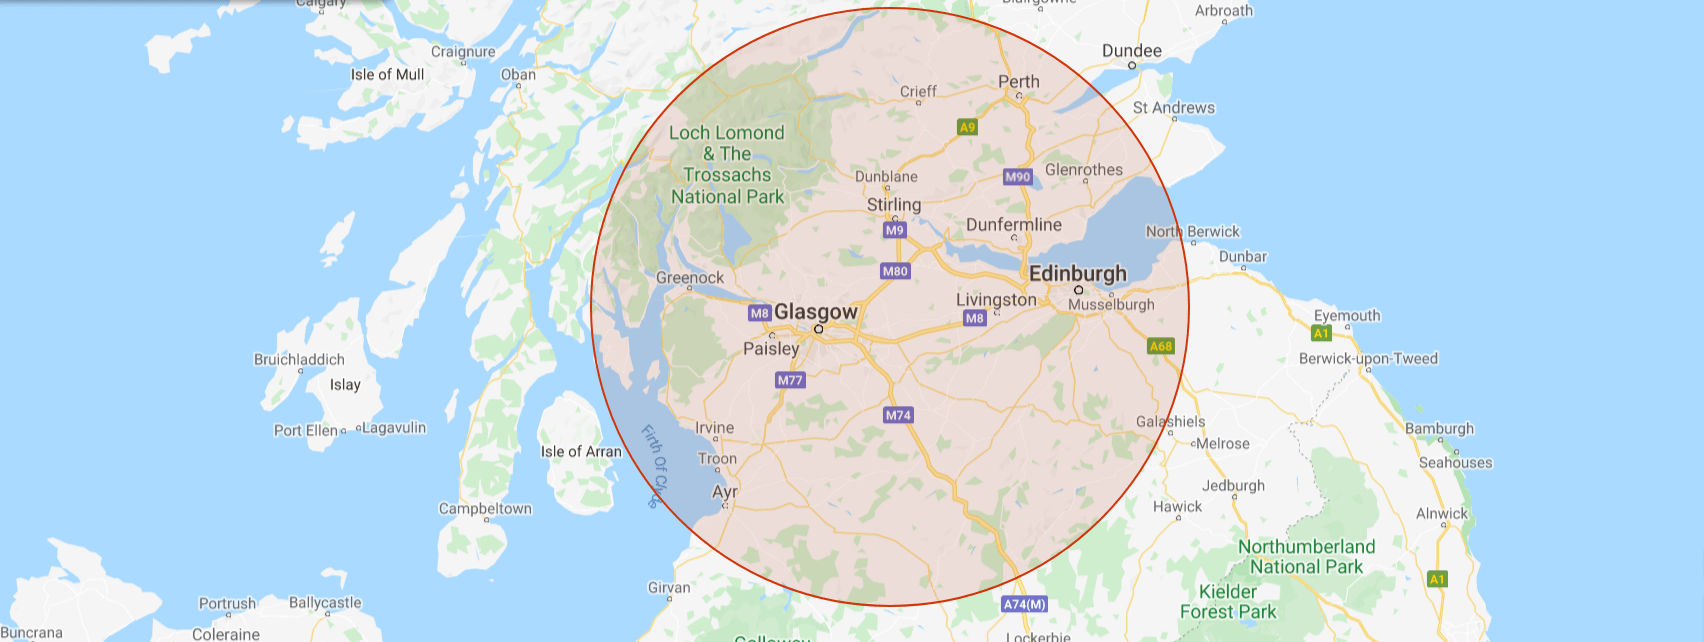 caledonian cabs area coverage